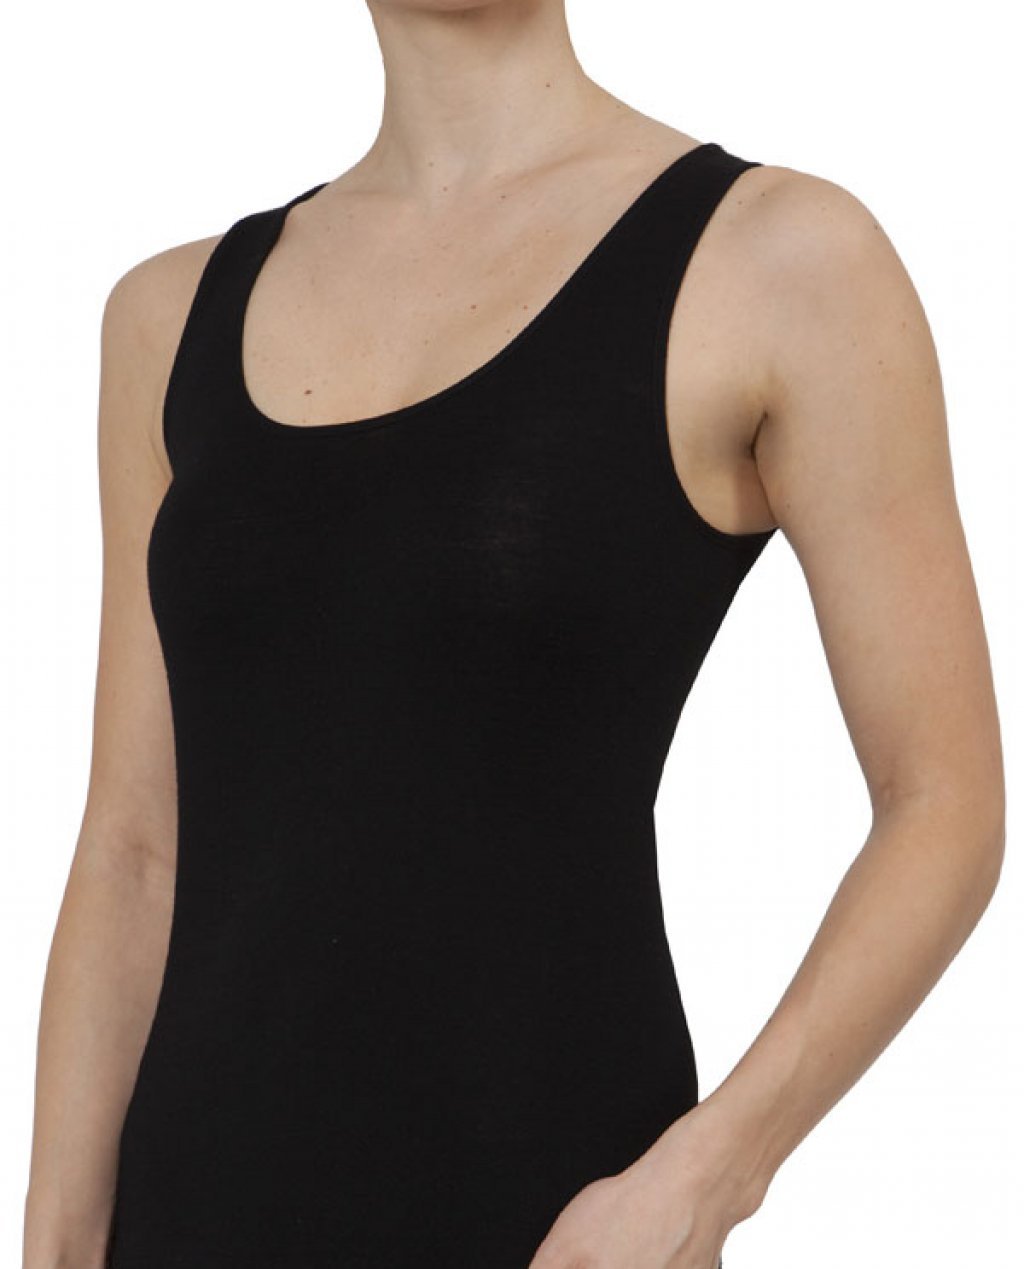 BaseLayers Thermal Underwear - Pure Merino Wool Vest B4400 - Singlets & Tanks Black / 10 / S  Available at Illusions Lingerie